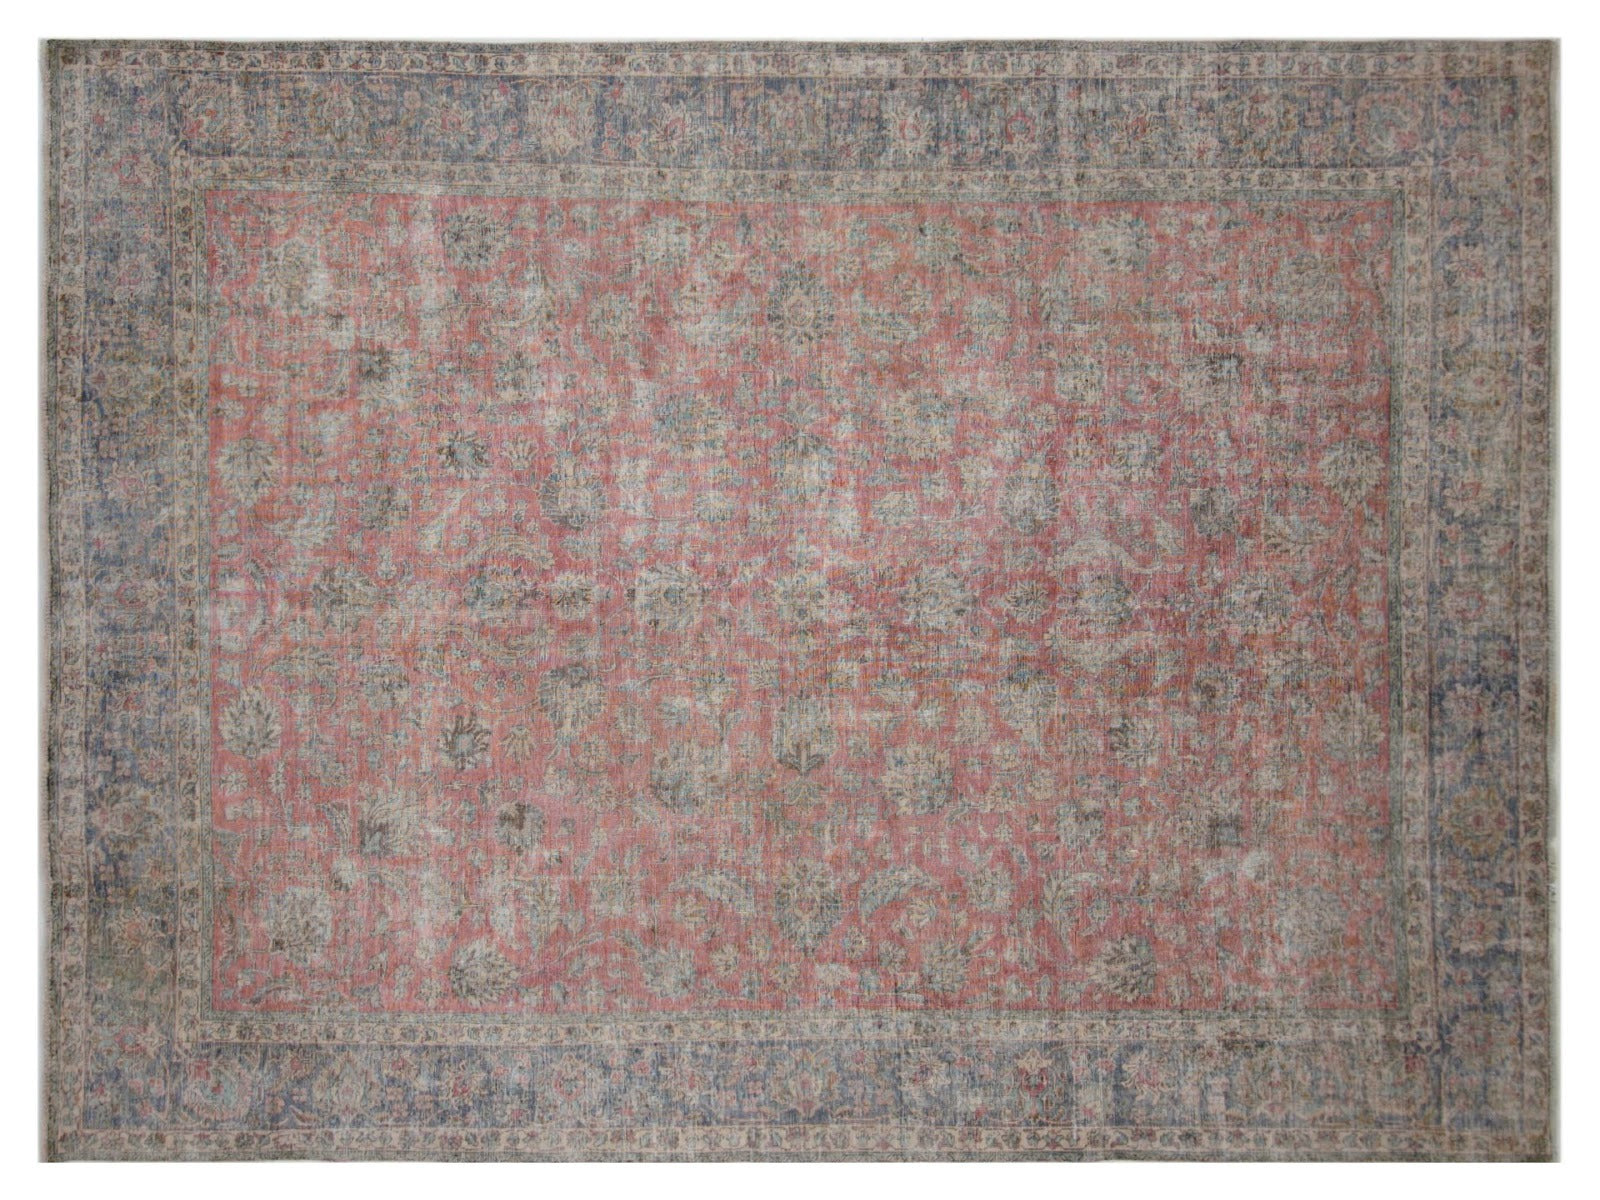 10x14 hand-knotted vintage Persian Art Deco rug, upcycled in blue with a red/rust border, perfect for modern-transitional interiors